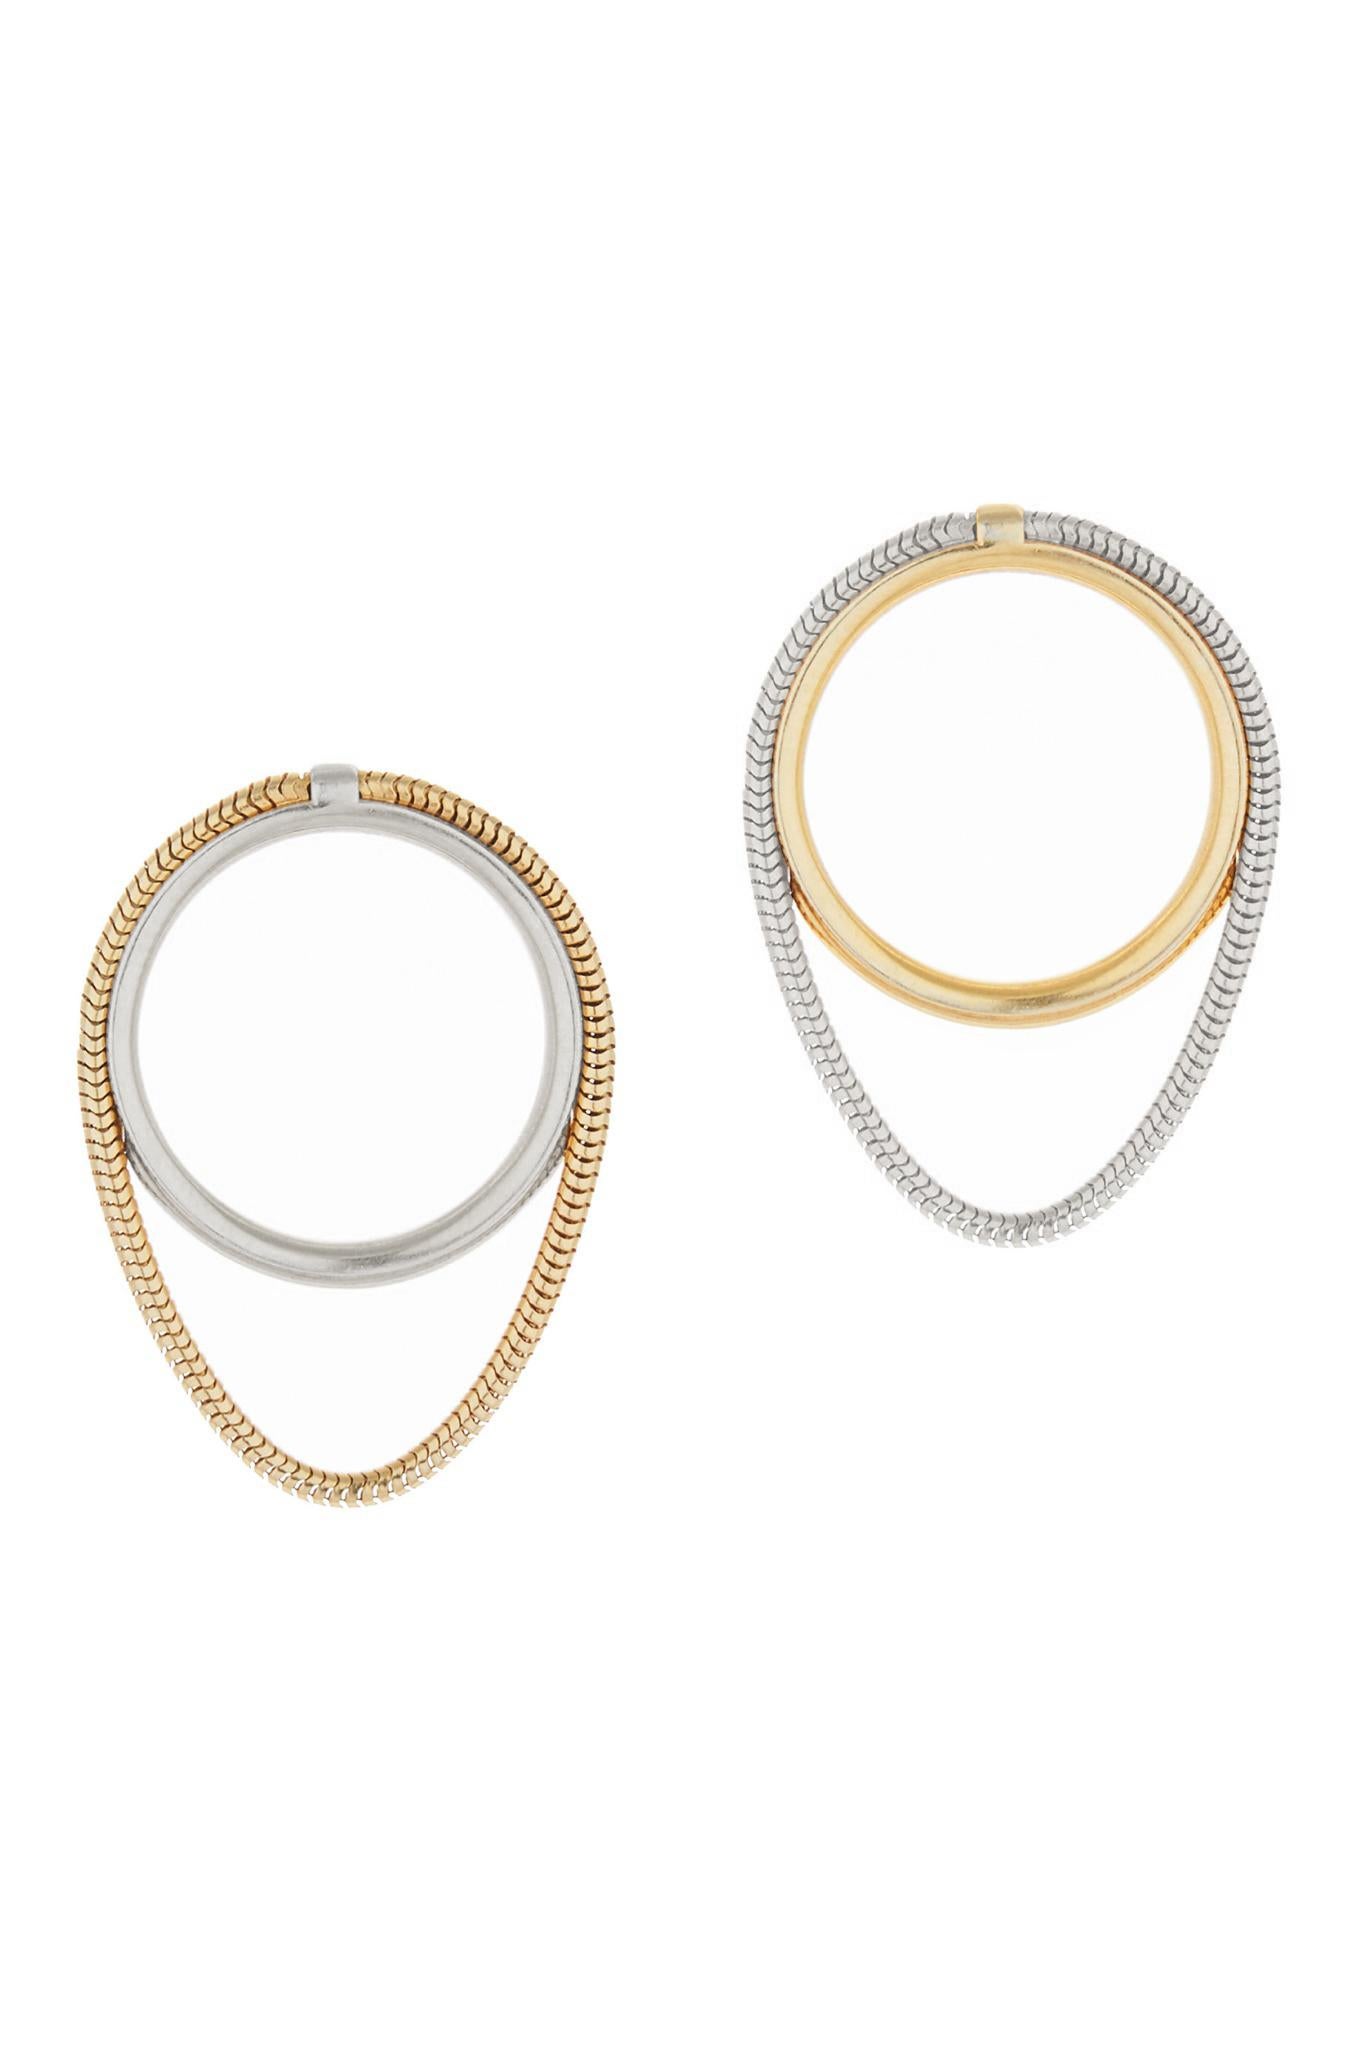  Earrings Studs Snake Chain 18K Gold Plated Silver Minimal  Greek Earrings In New Condition For Sale In Athens, GR